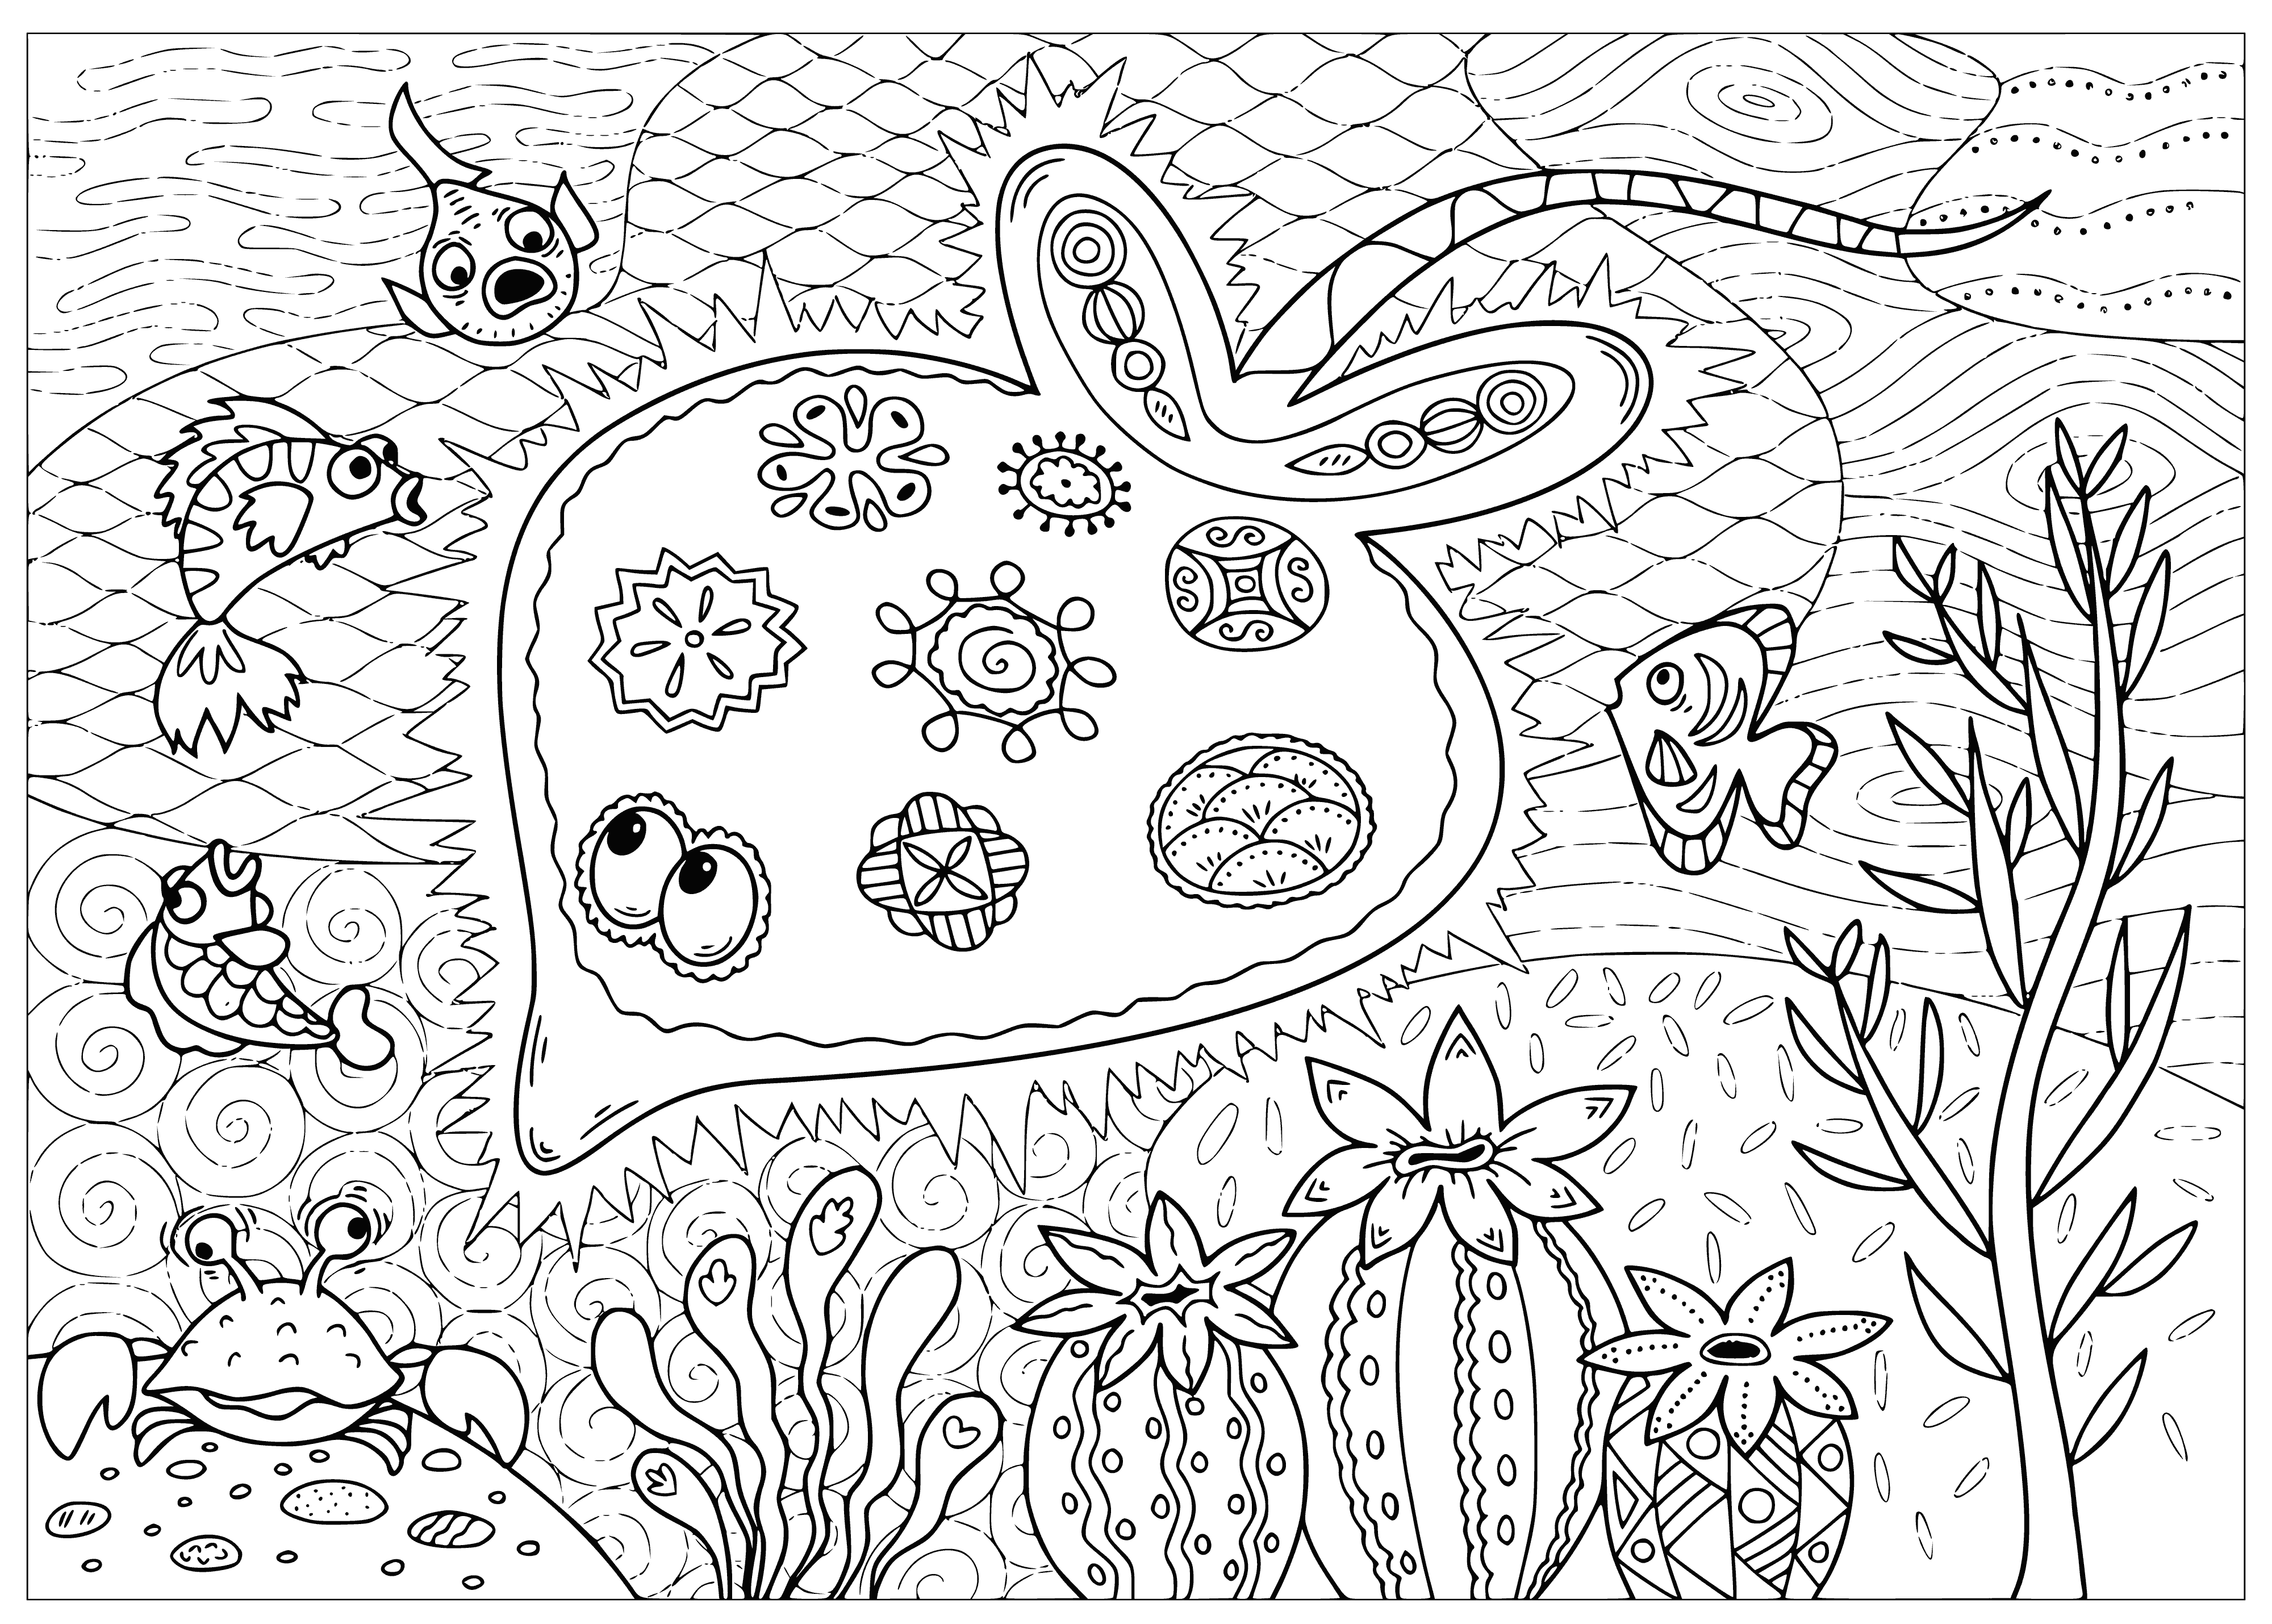 coloring page: Electric stingray swims in sea with long tail, barb, light blue w/ darker spots, surrounded by small fish.